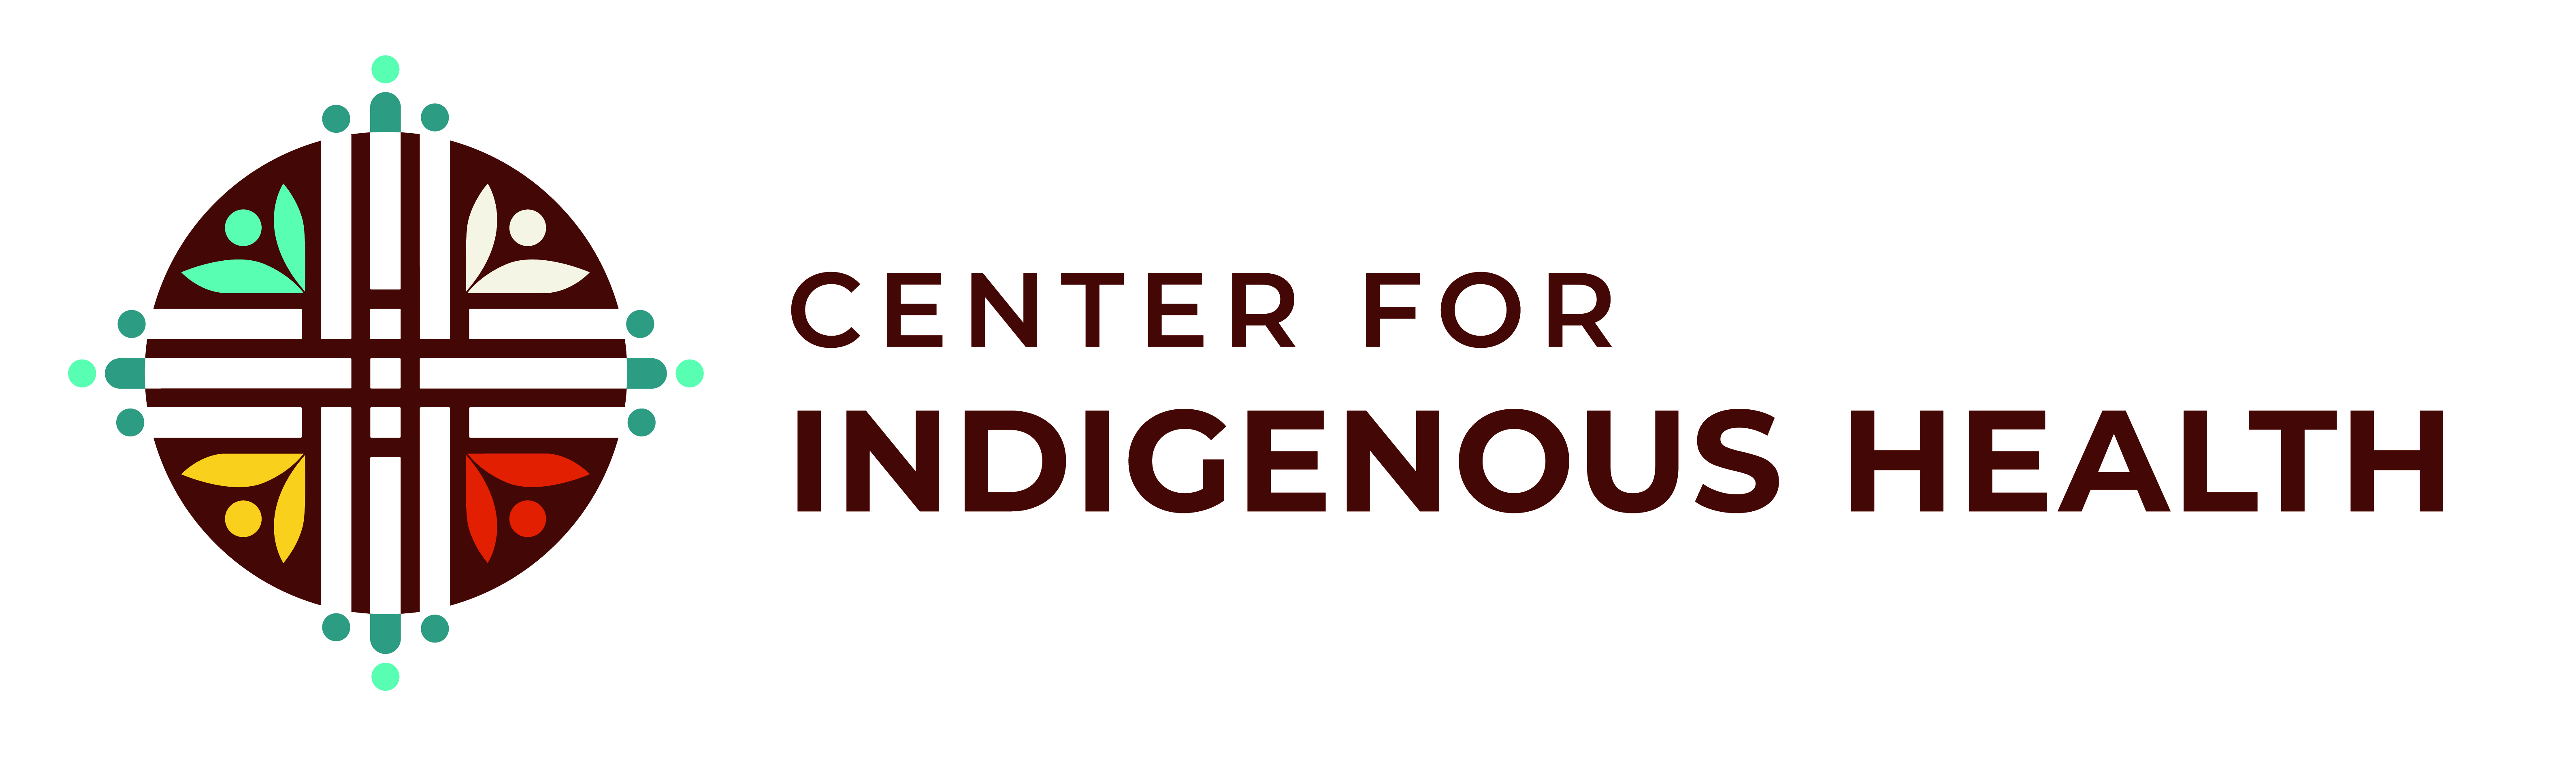 Center for Indigenous Health